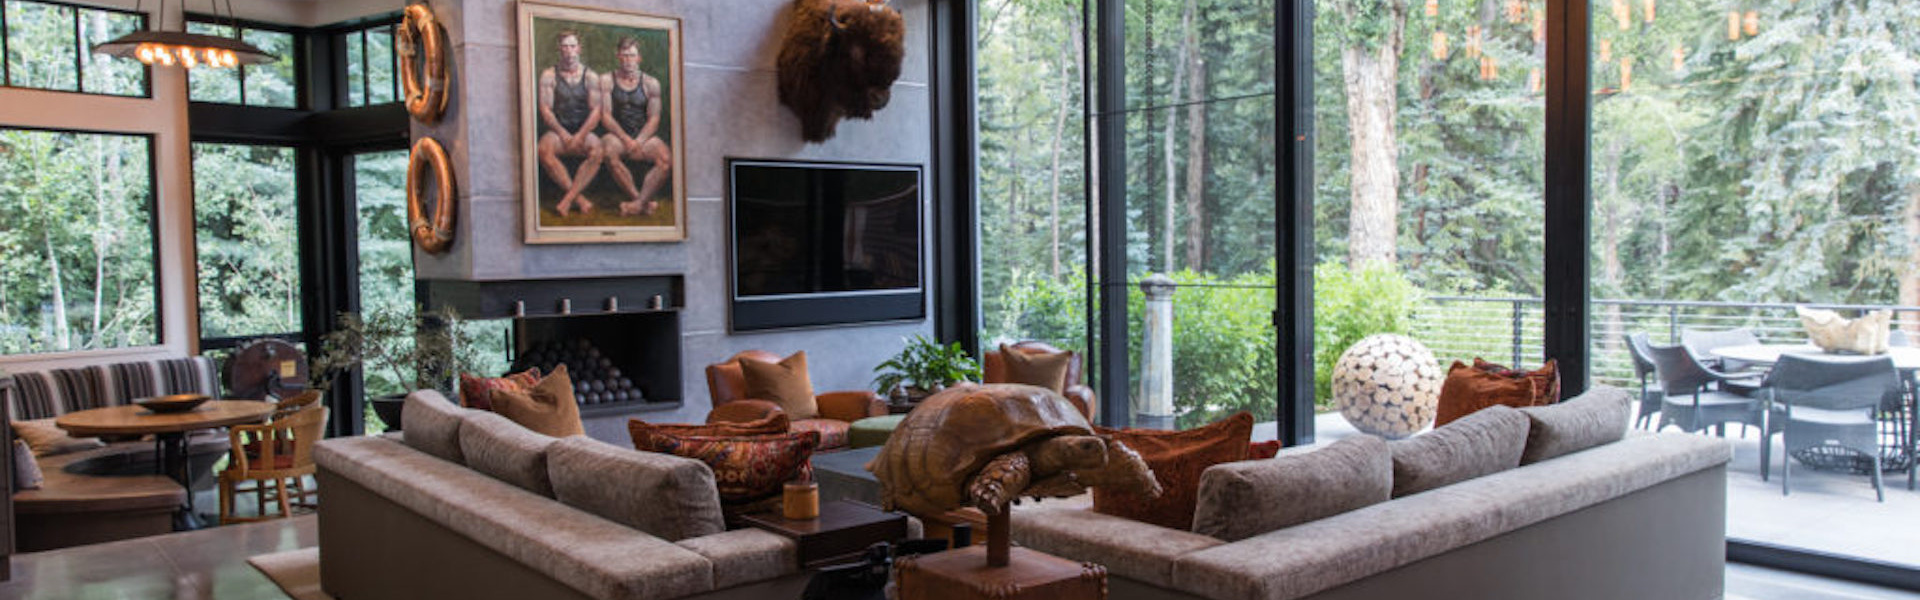 Smart home installation by Paragon Systems Integration for Snowmass